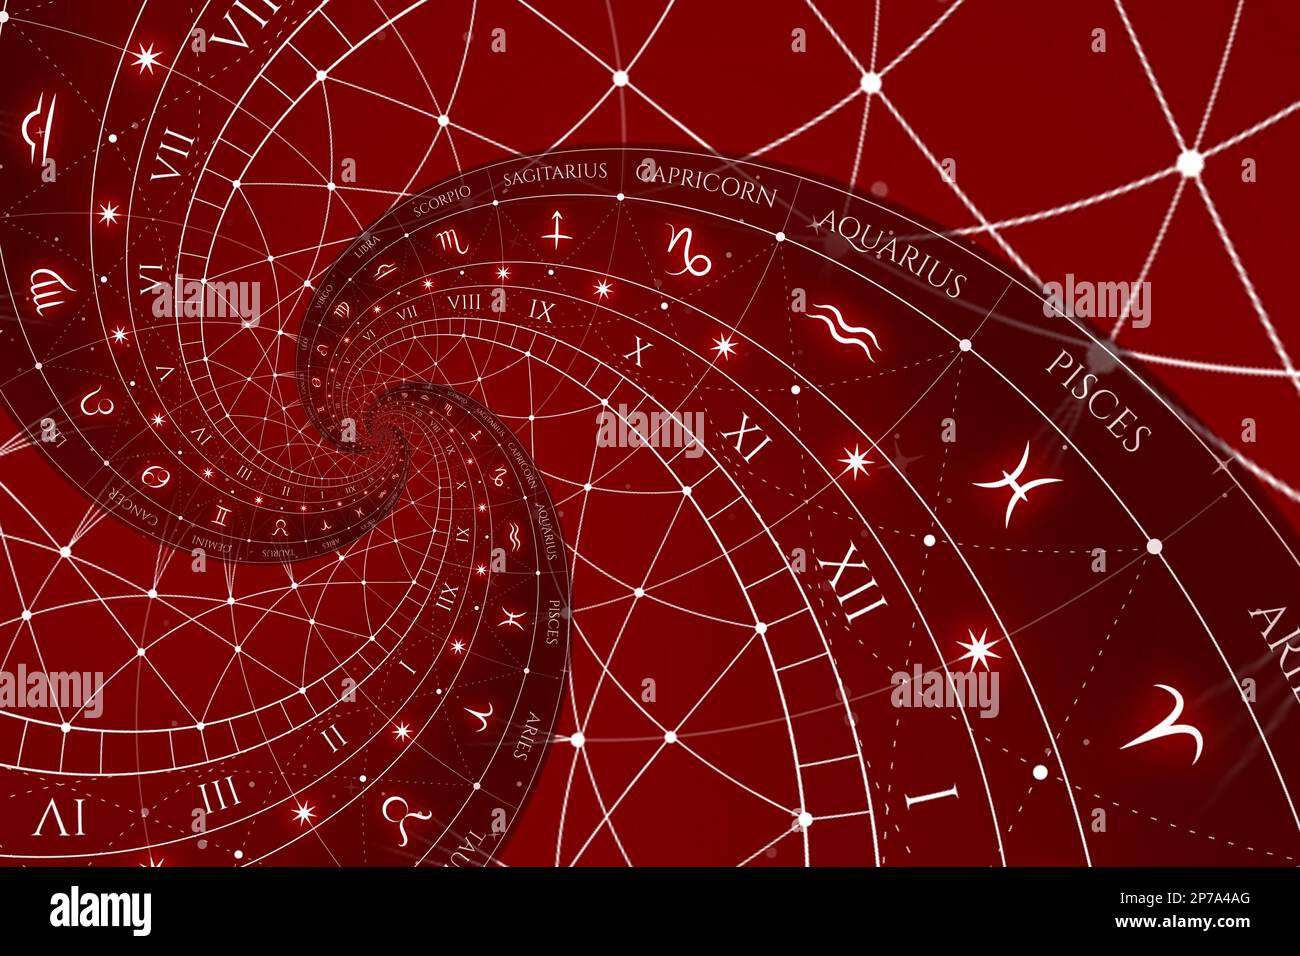 Astrology and alchemy sign background illustration - red Stock Photo